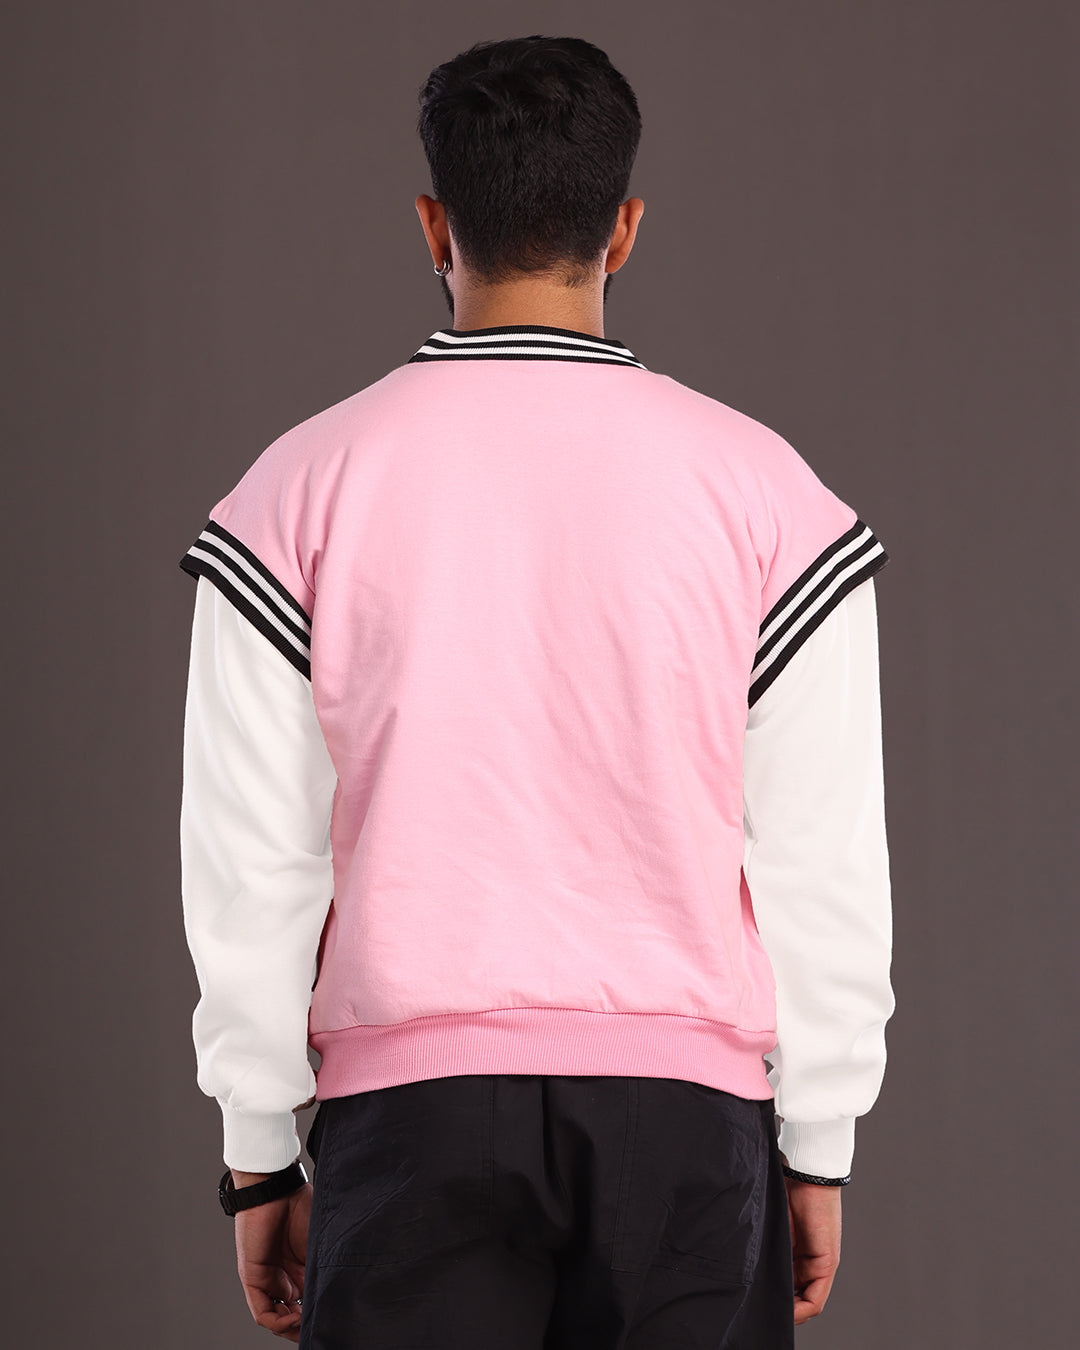 Stay Cozy, Stay Fashionable: Spider Pink Oversized Hoodies for Men